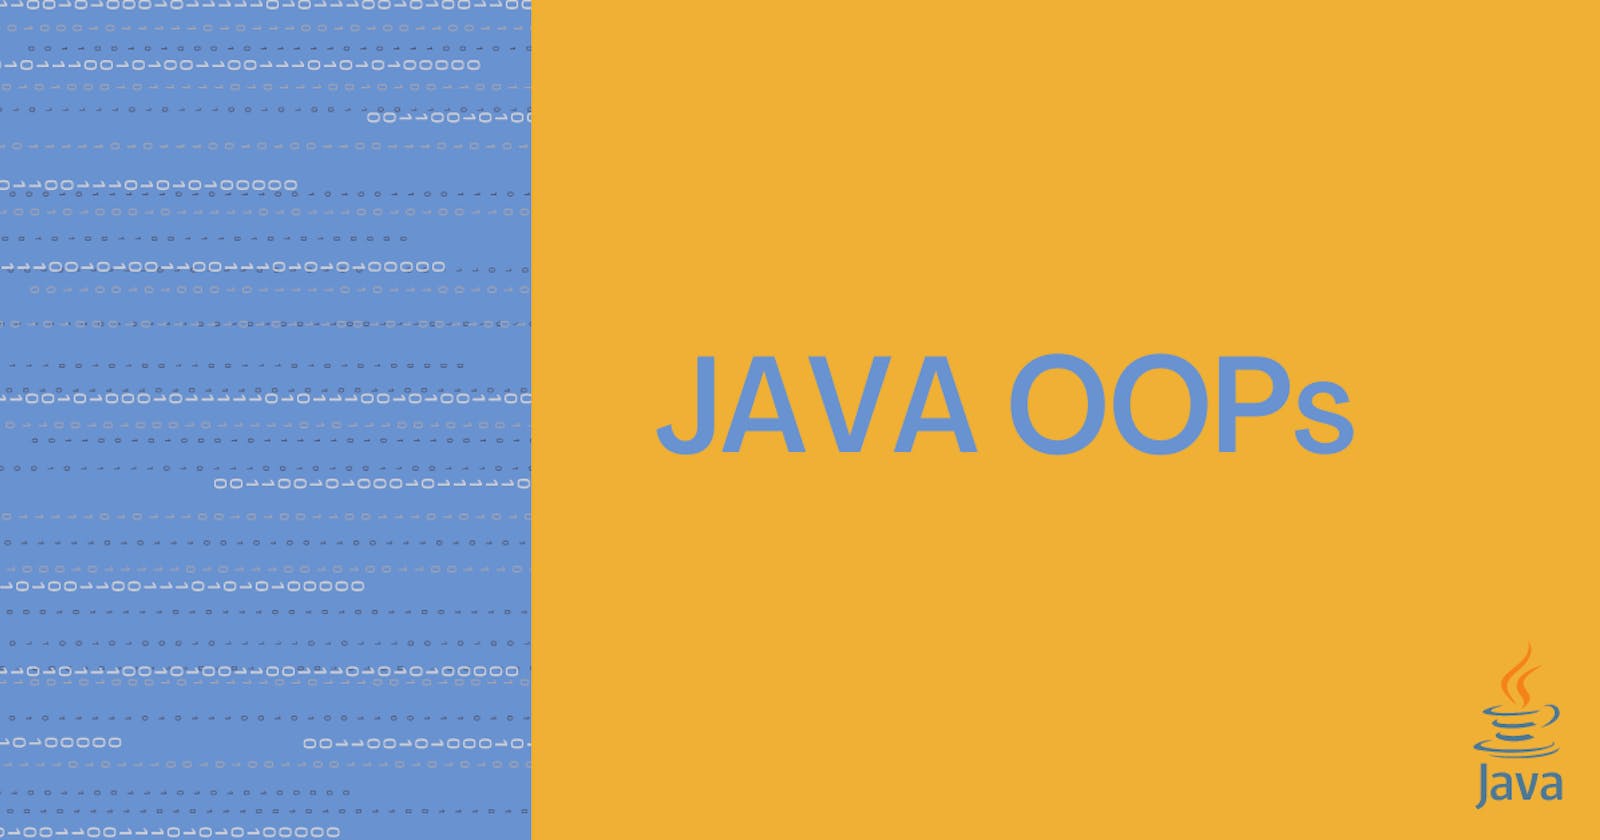 Don't say oops(🙀)! Learn OOPs with Java